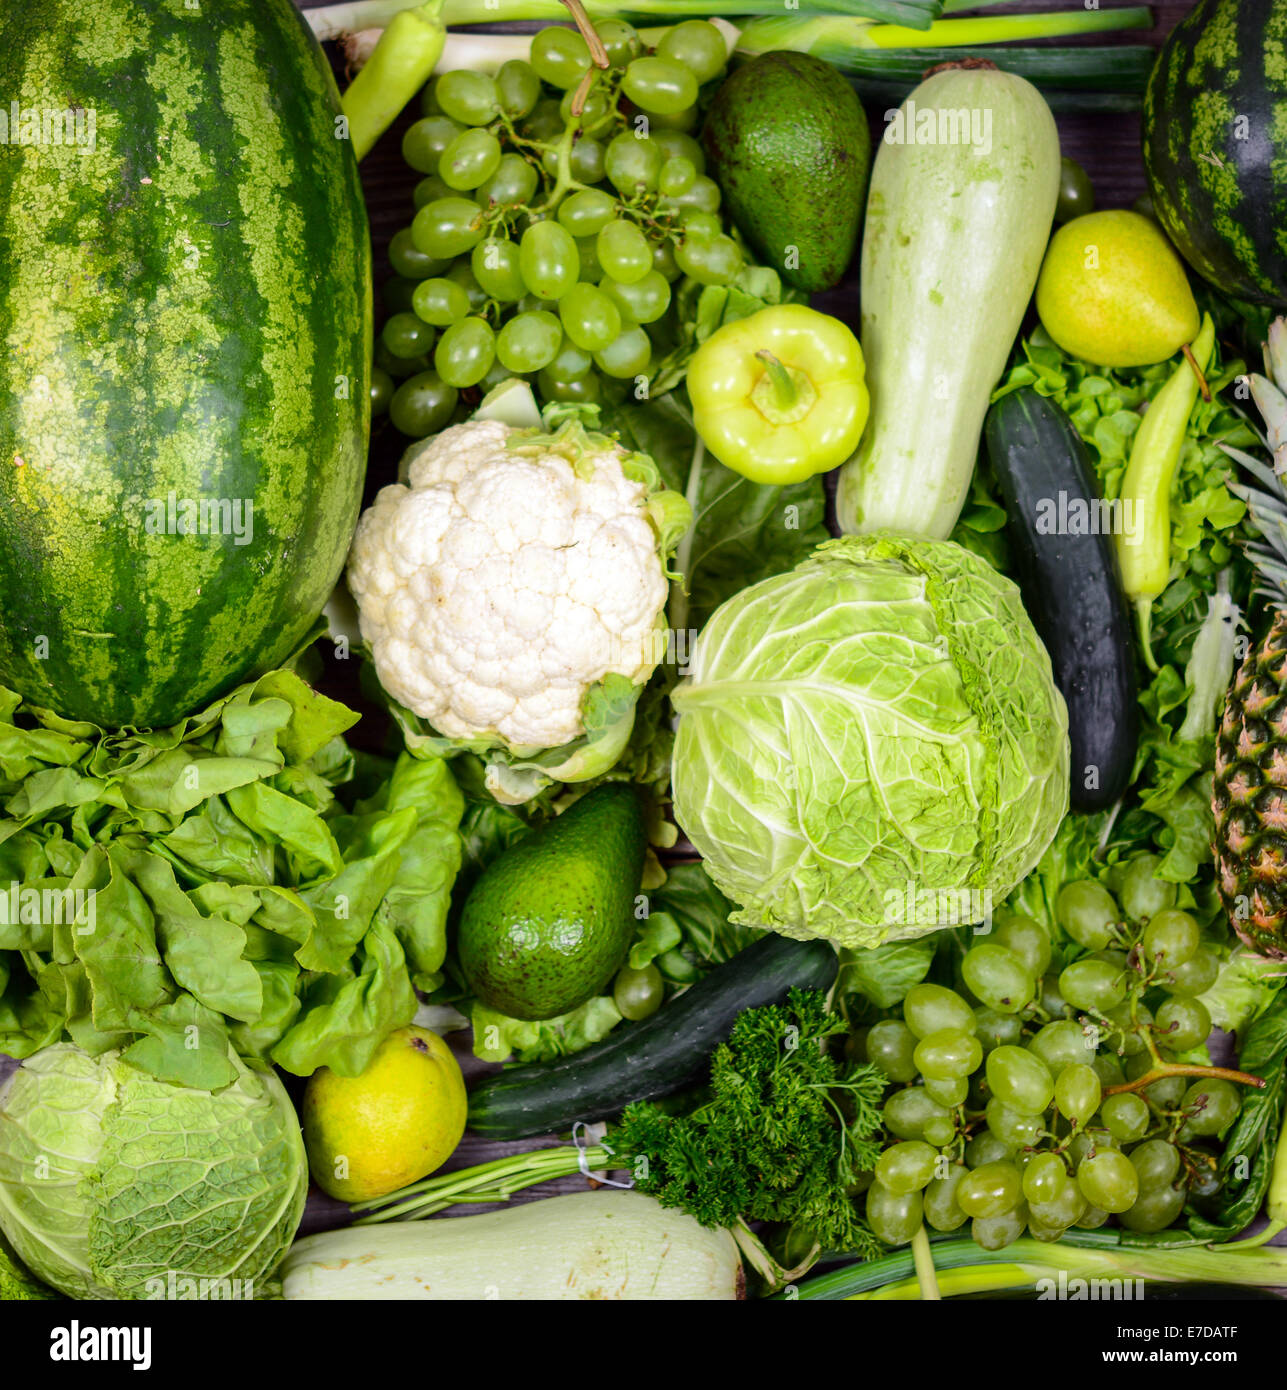 Huge group of fresh green fruit and vegetables - Concept of healthy green food Stock Photo